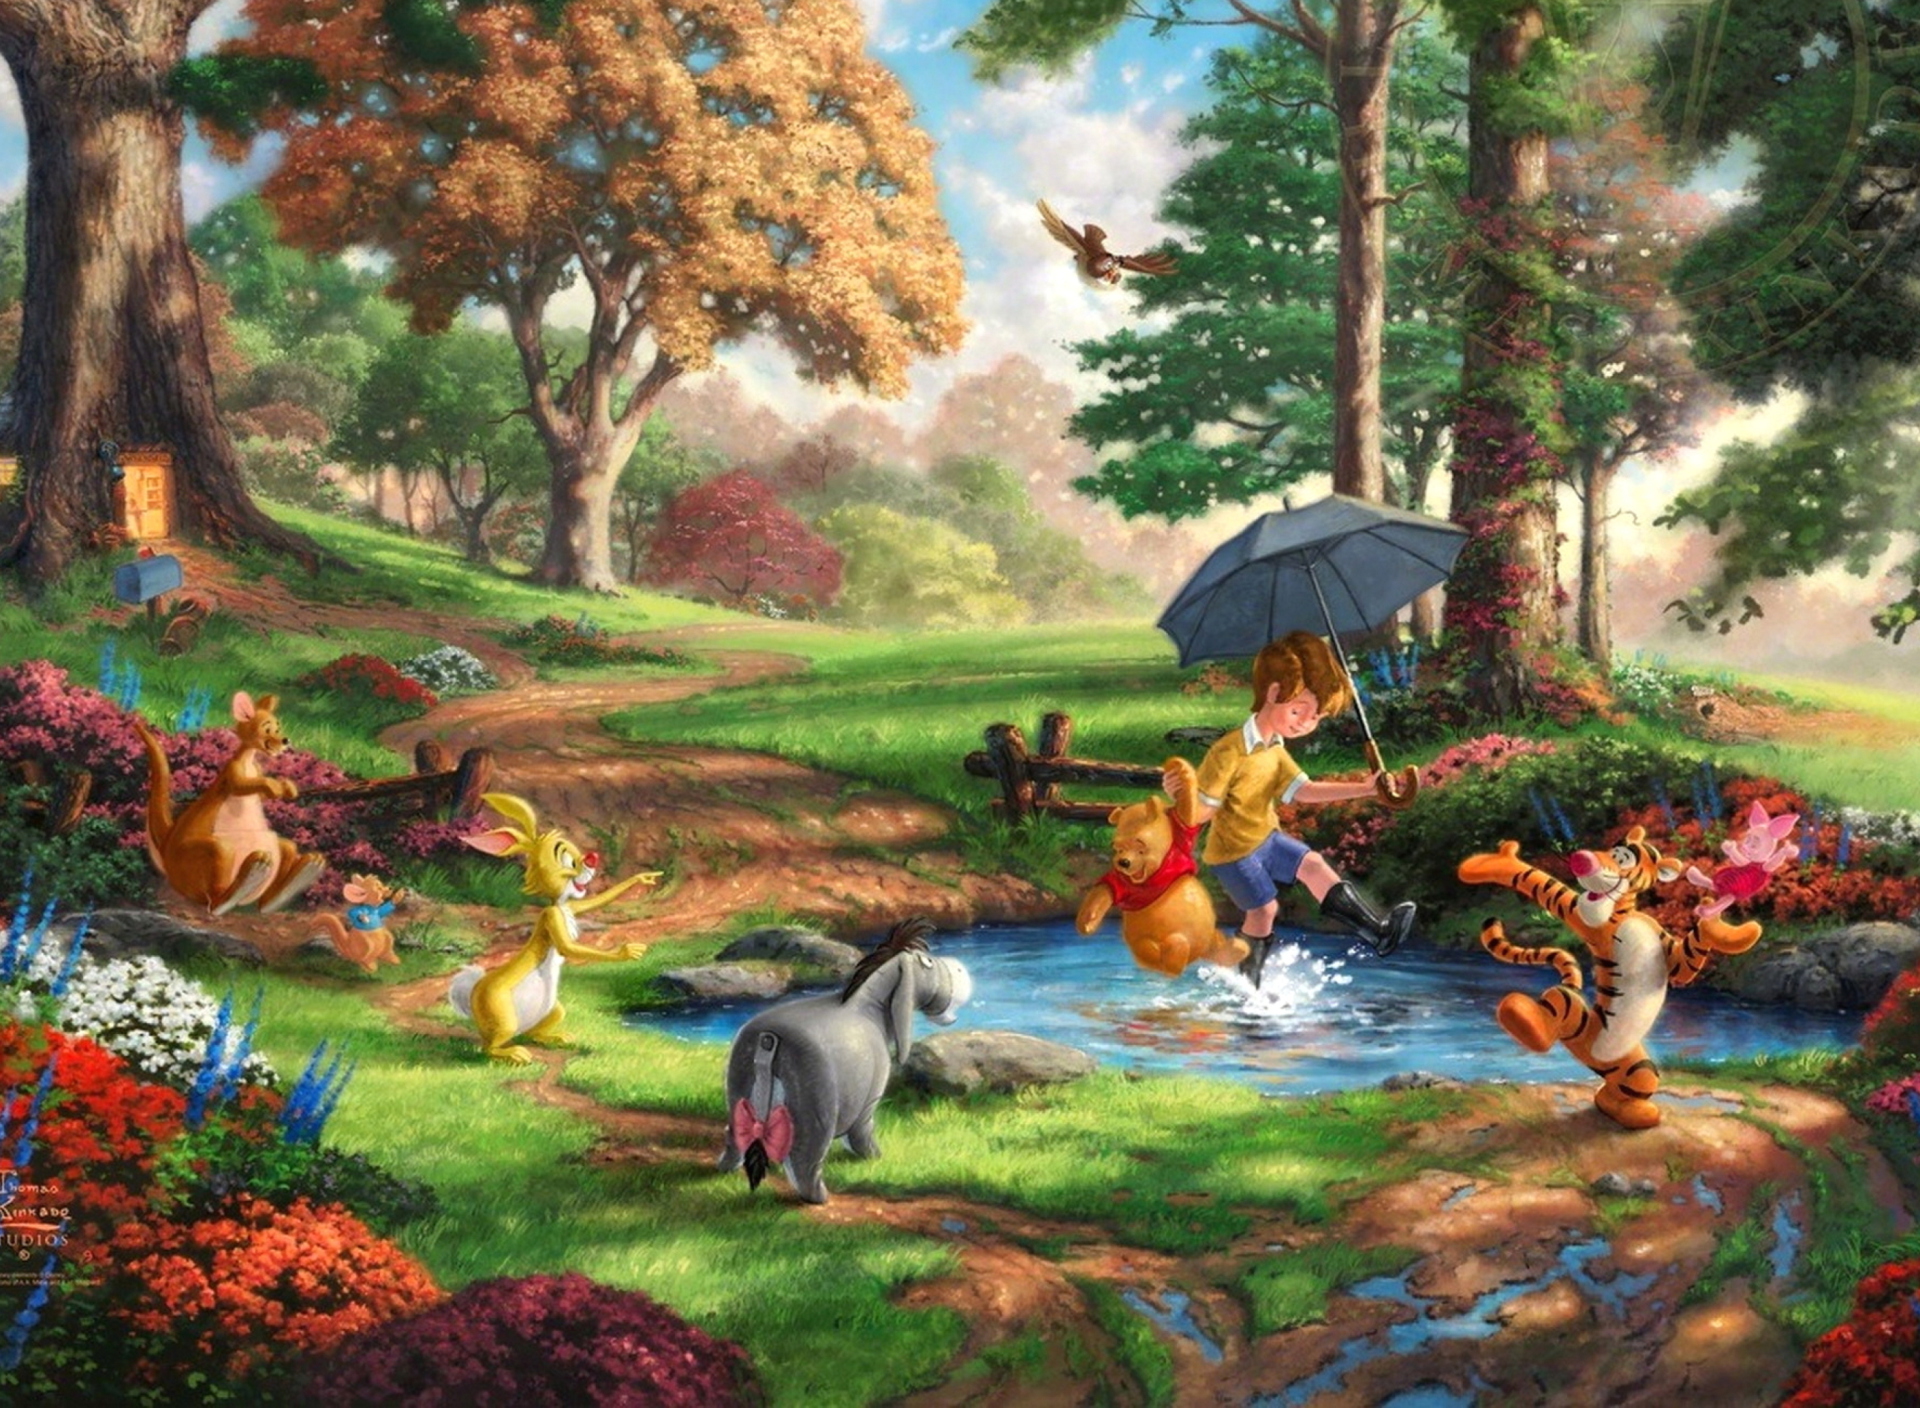 Winnie The Pooh And Friends wallpaper 1920x1408